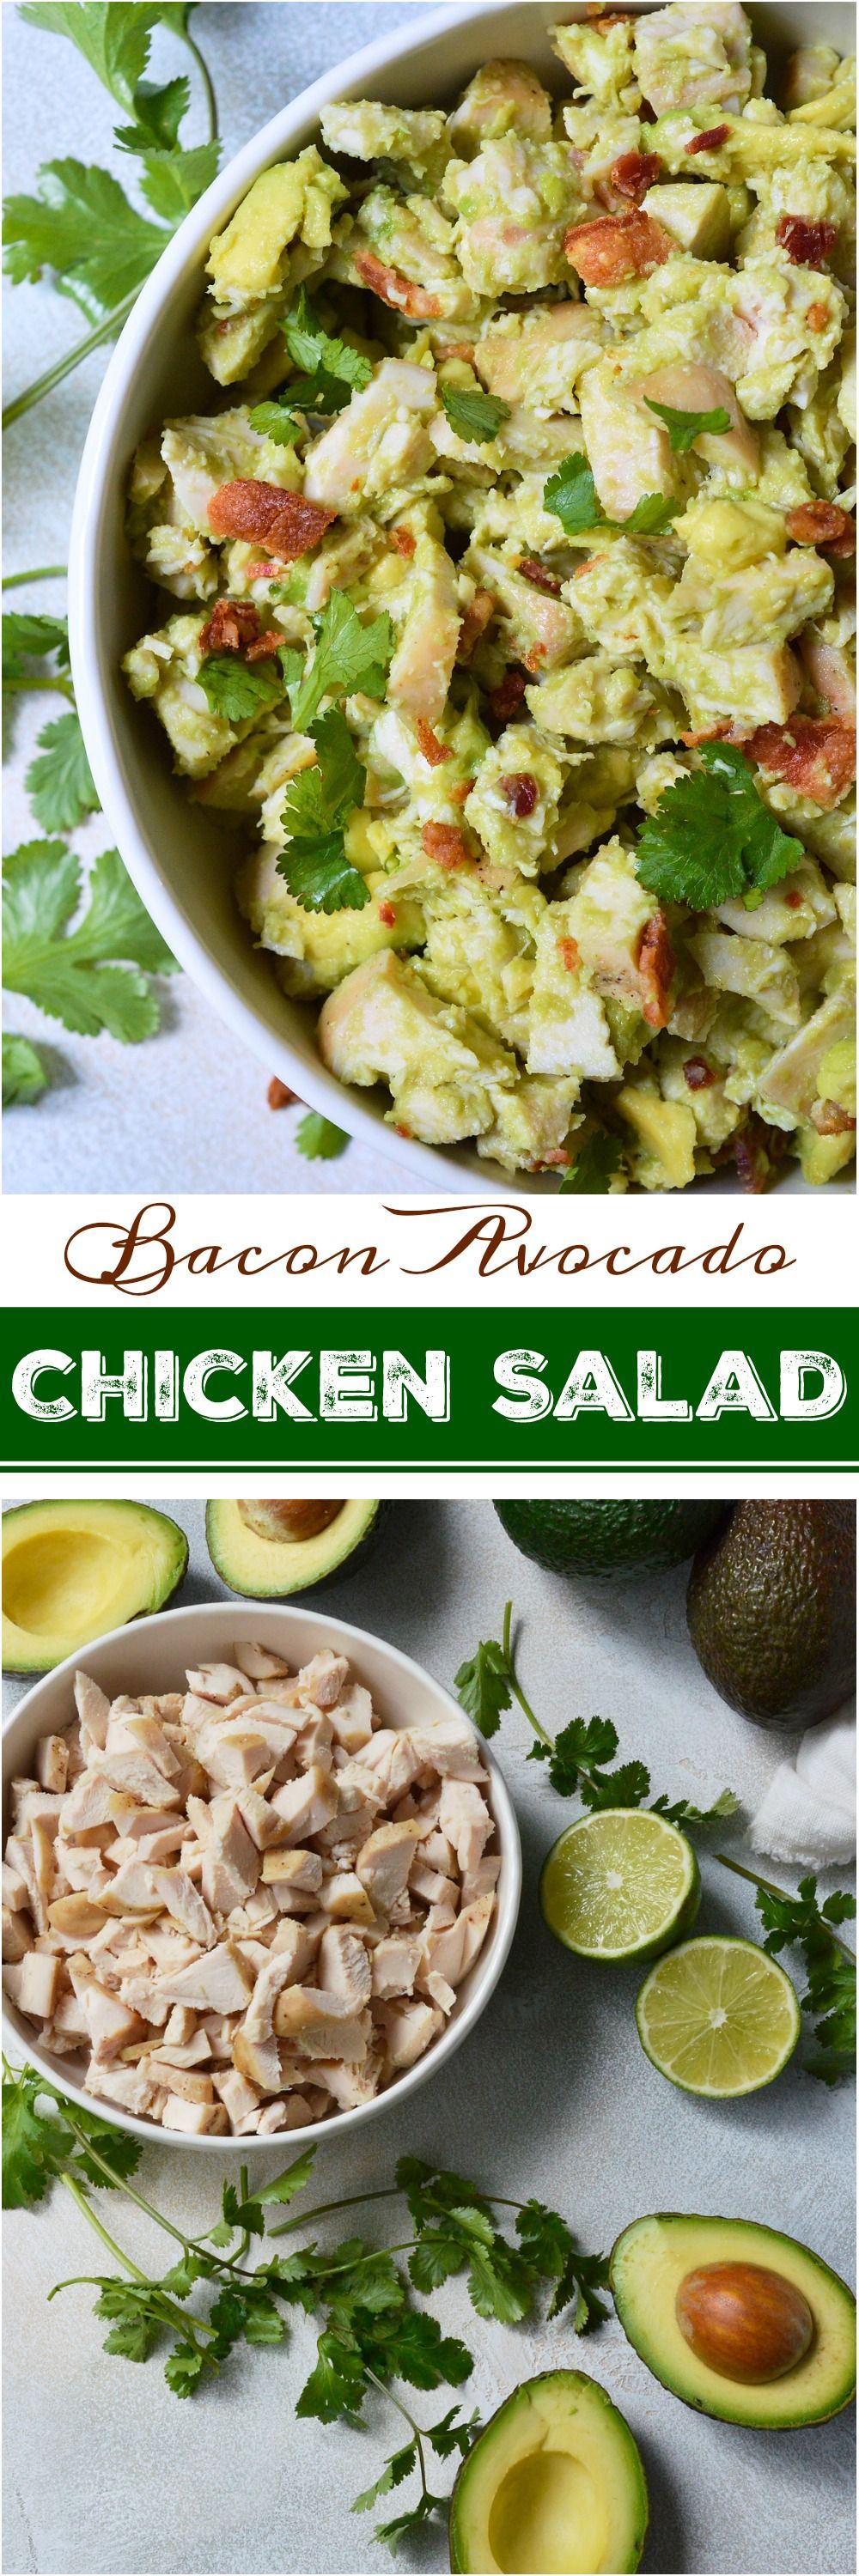 Wanting to eat healthy and nutritious without giving up your favorite foods? This Bacon Avocado Chicken Salad Recipe is full of